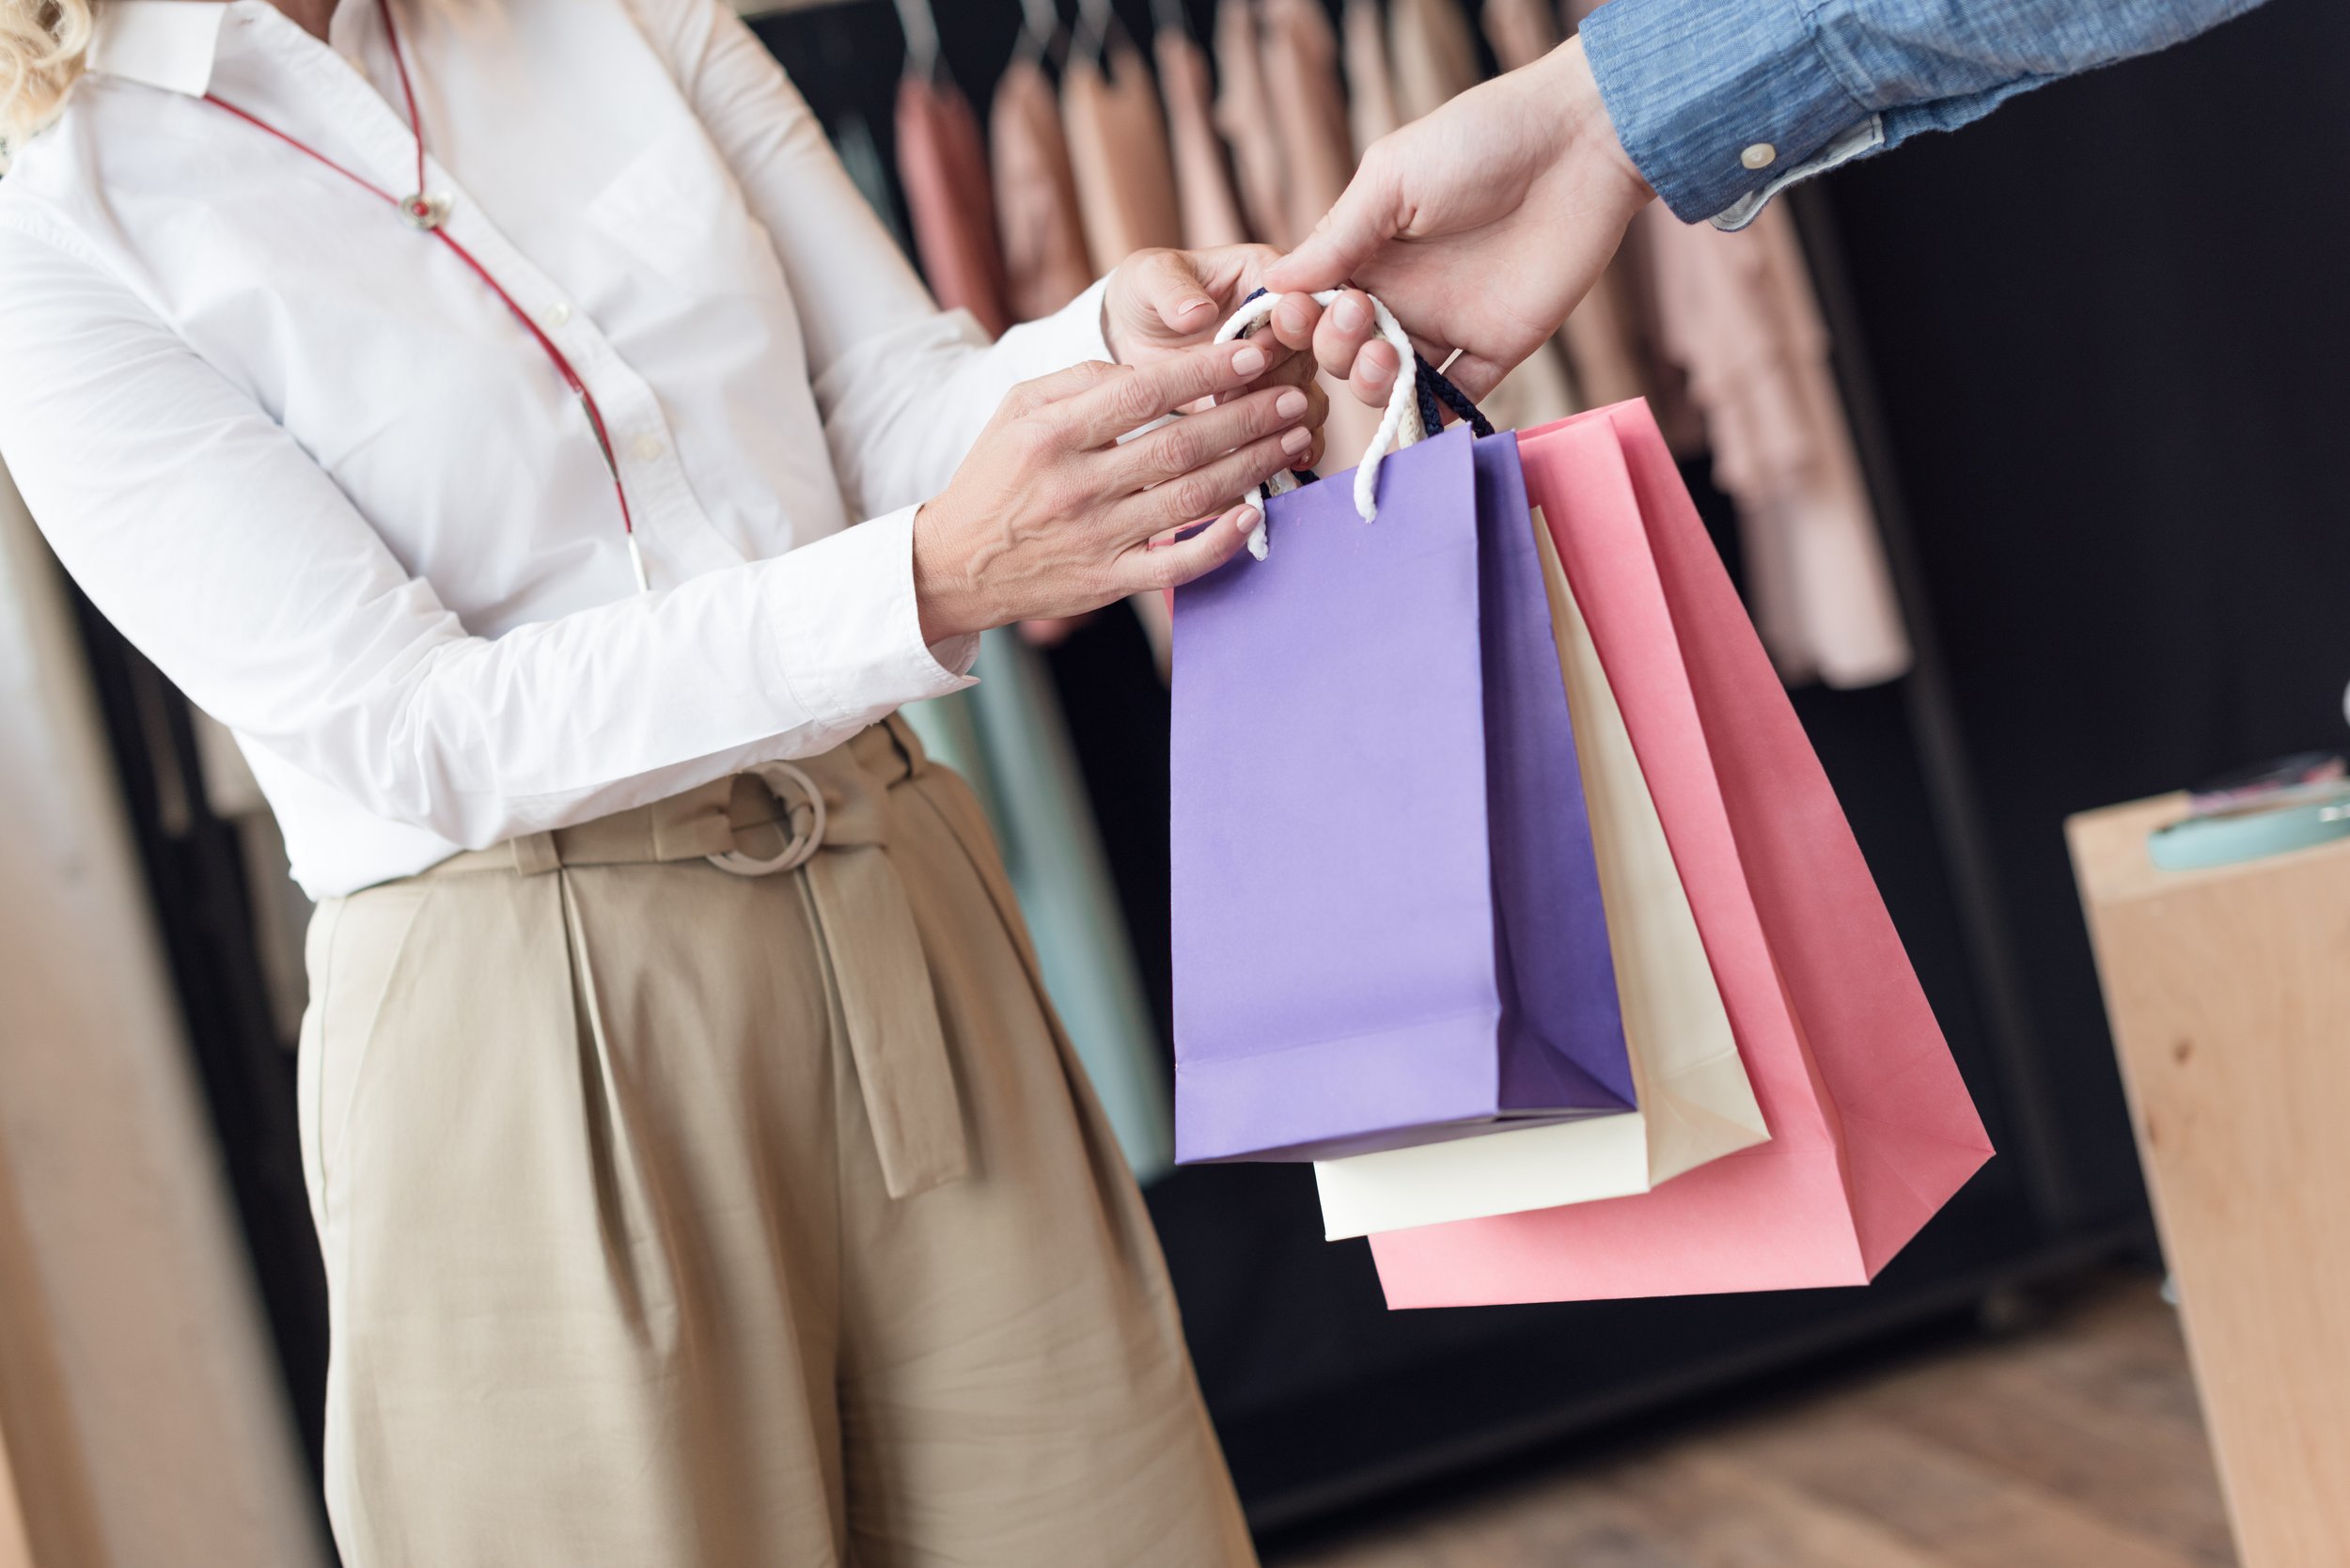 RPA in the retail and consumer sector